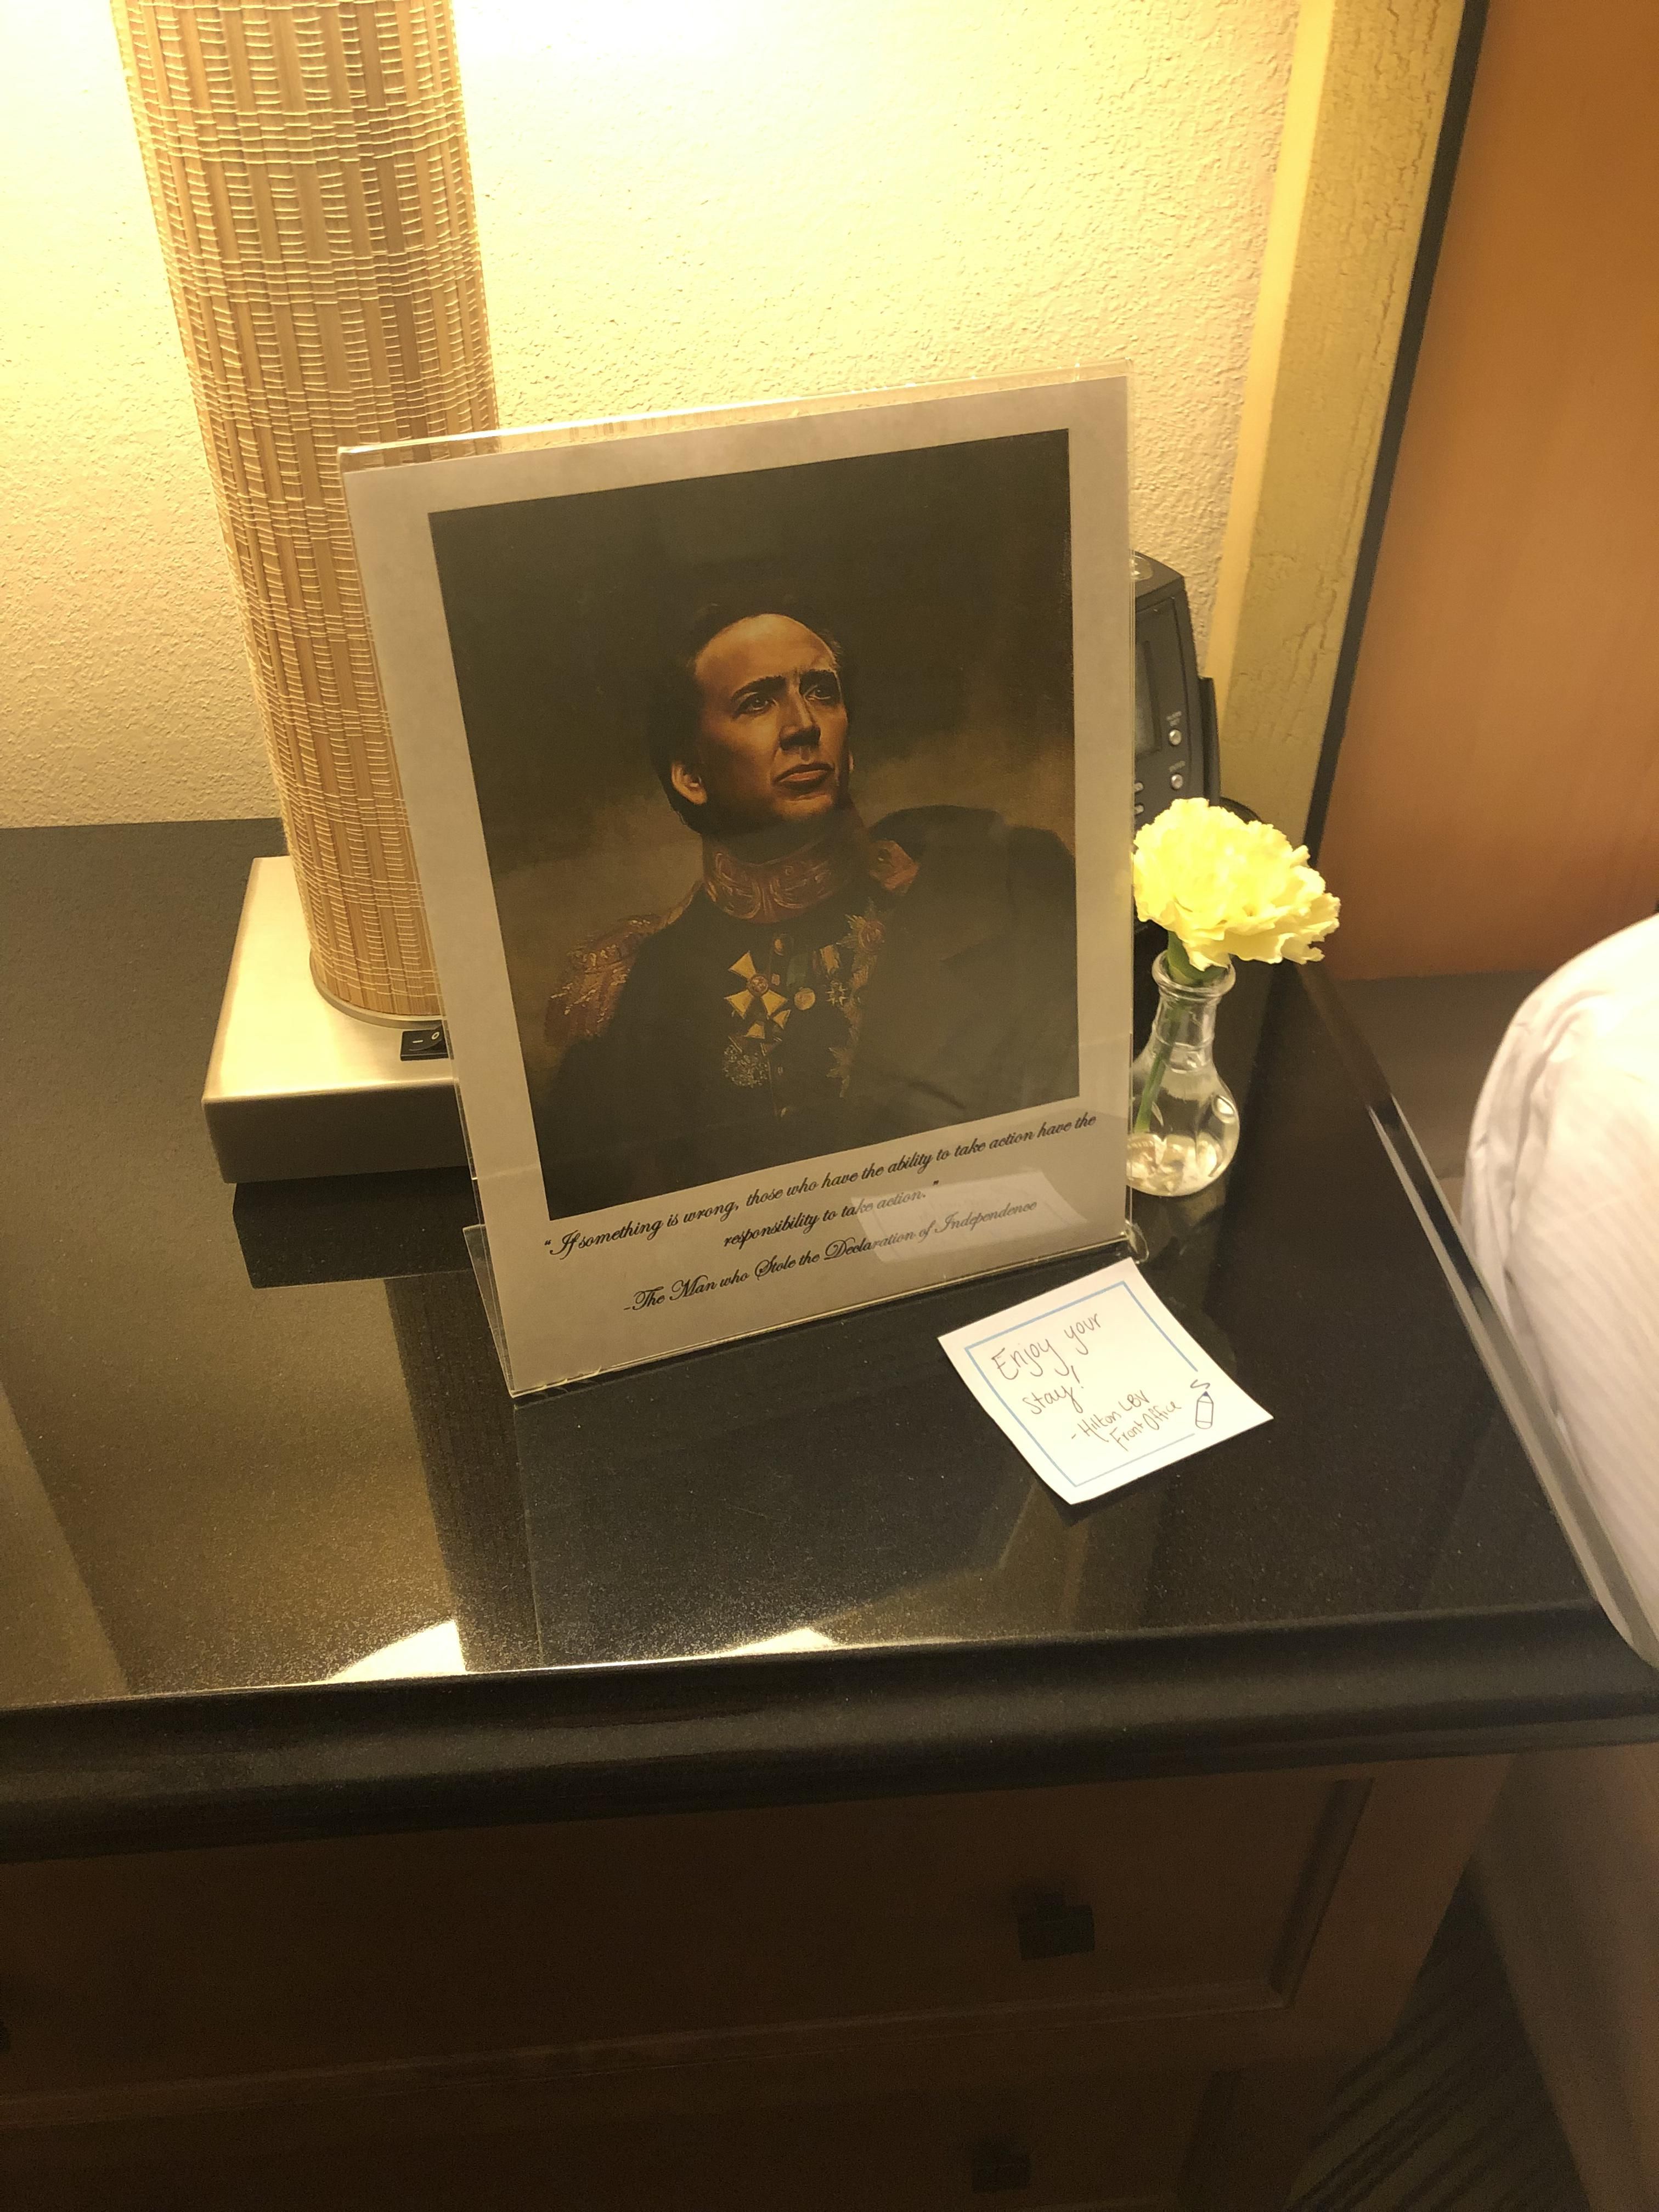 I requested a Nicolas Cage picture on the bedside of the hotel I’m staying at online in the special request section... They delivered!